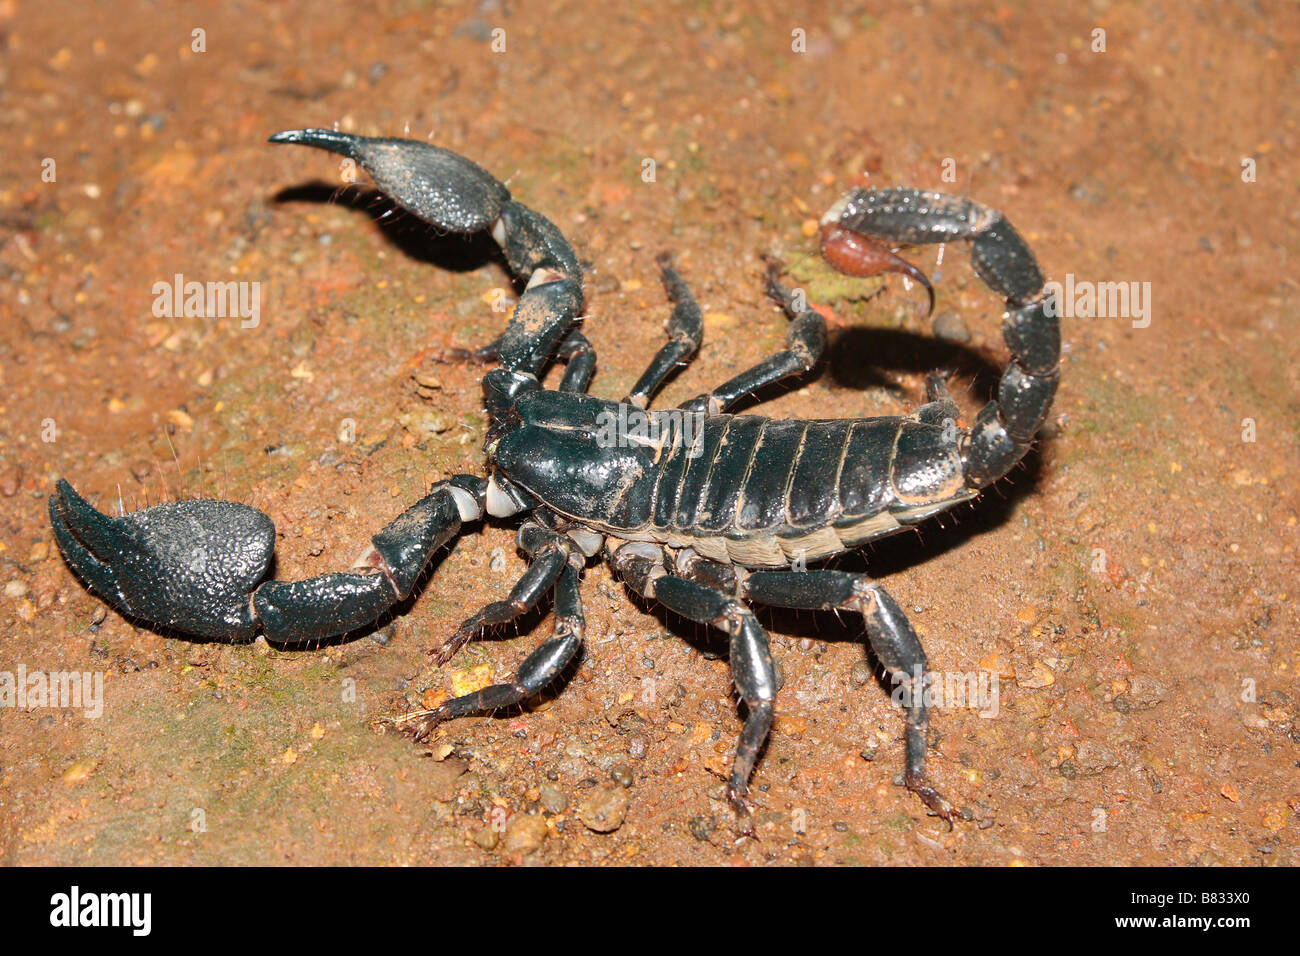 Scorpion. A large black scorpion which lives in flattened burrows. Its sting is very painful. Stock Photo